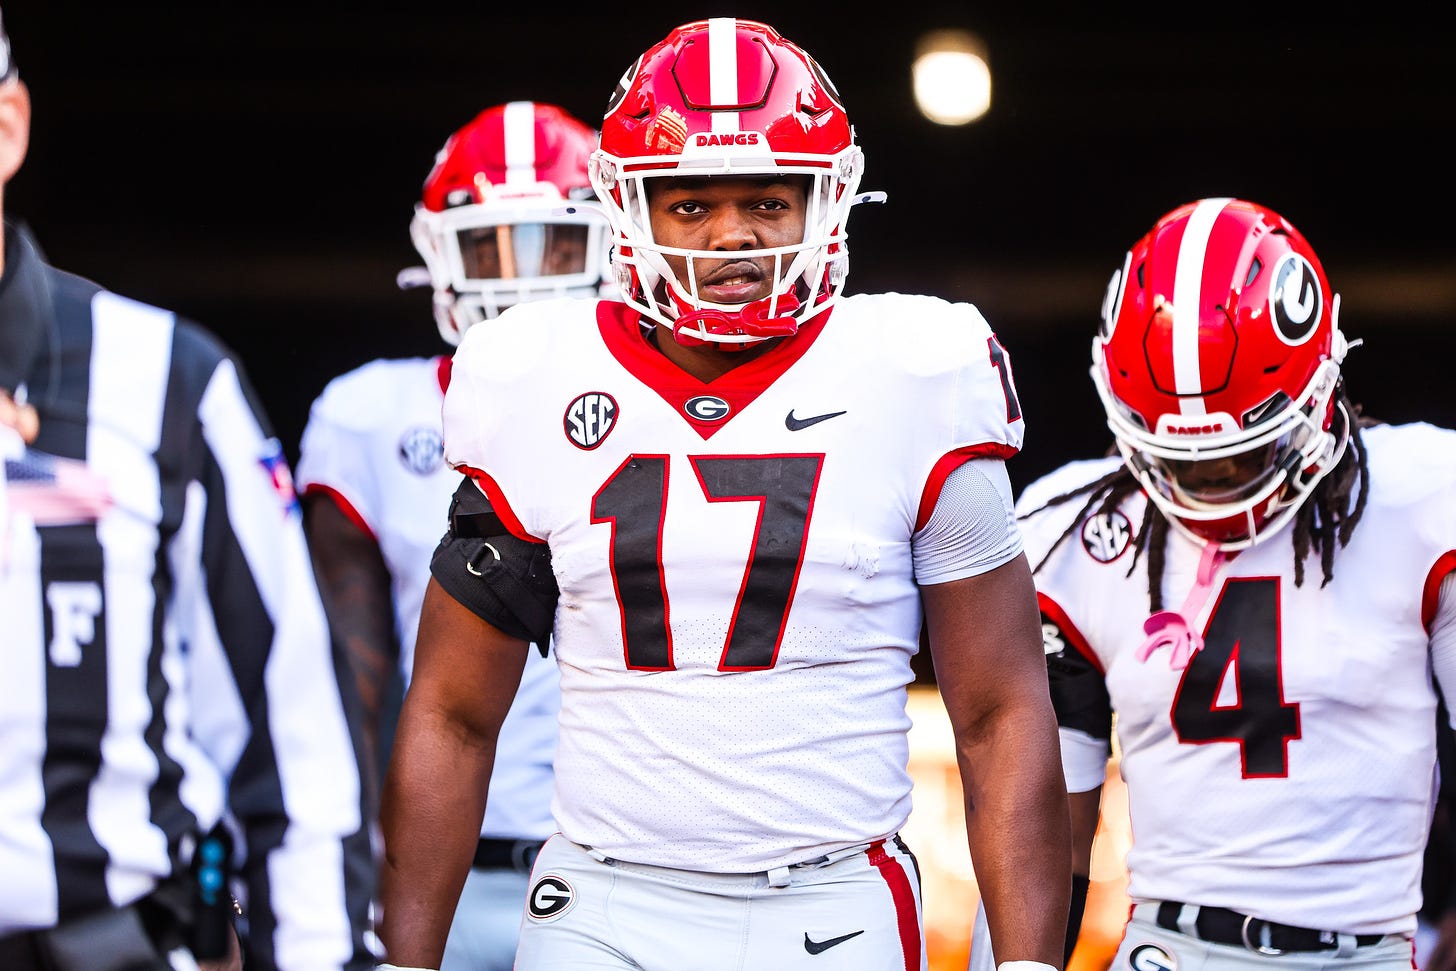 Georgia inside linebacker Nakobe Dean (17) during the Bulldogs’ game against Tennessee at Neyland Stadium in Knoxville, Tenn., on Saturday, Nov. 13, 2021. (Photo by Tony Walsh)